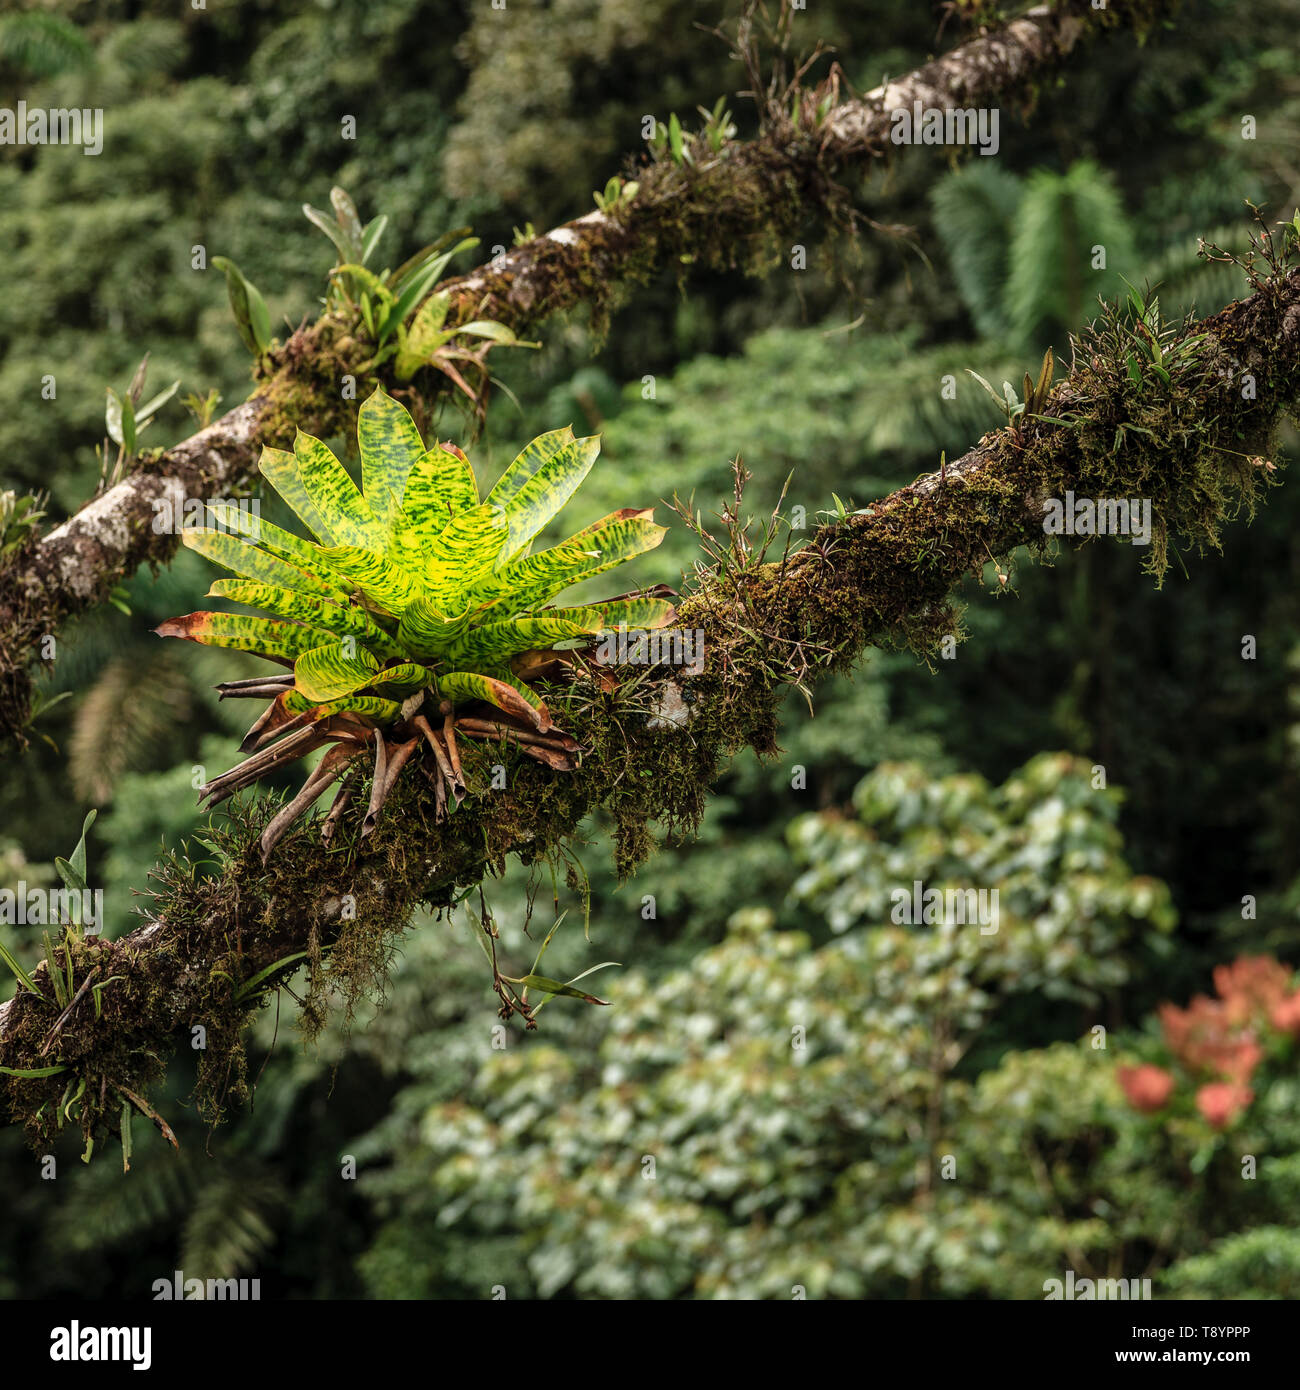 Bromeliad plants are growing on tree branches in rainforest in Costa Rica Stock Photo